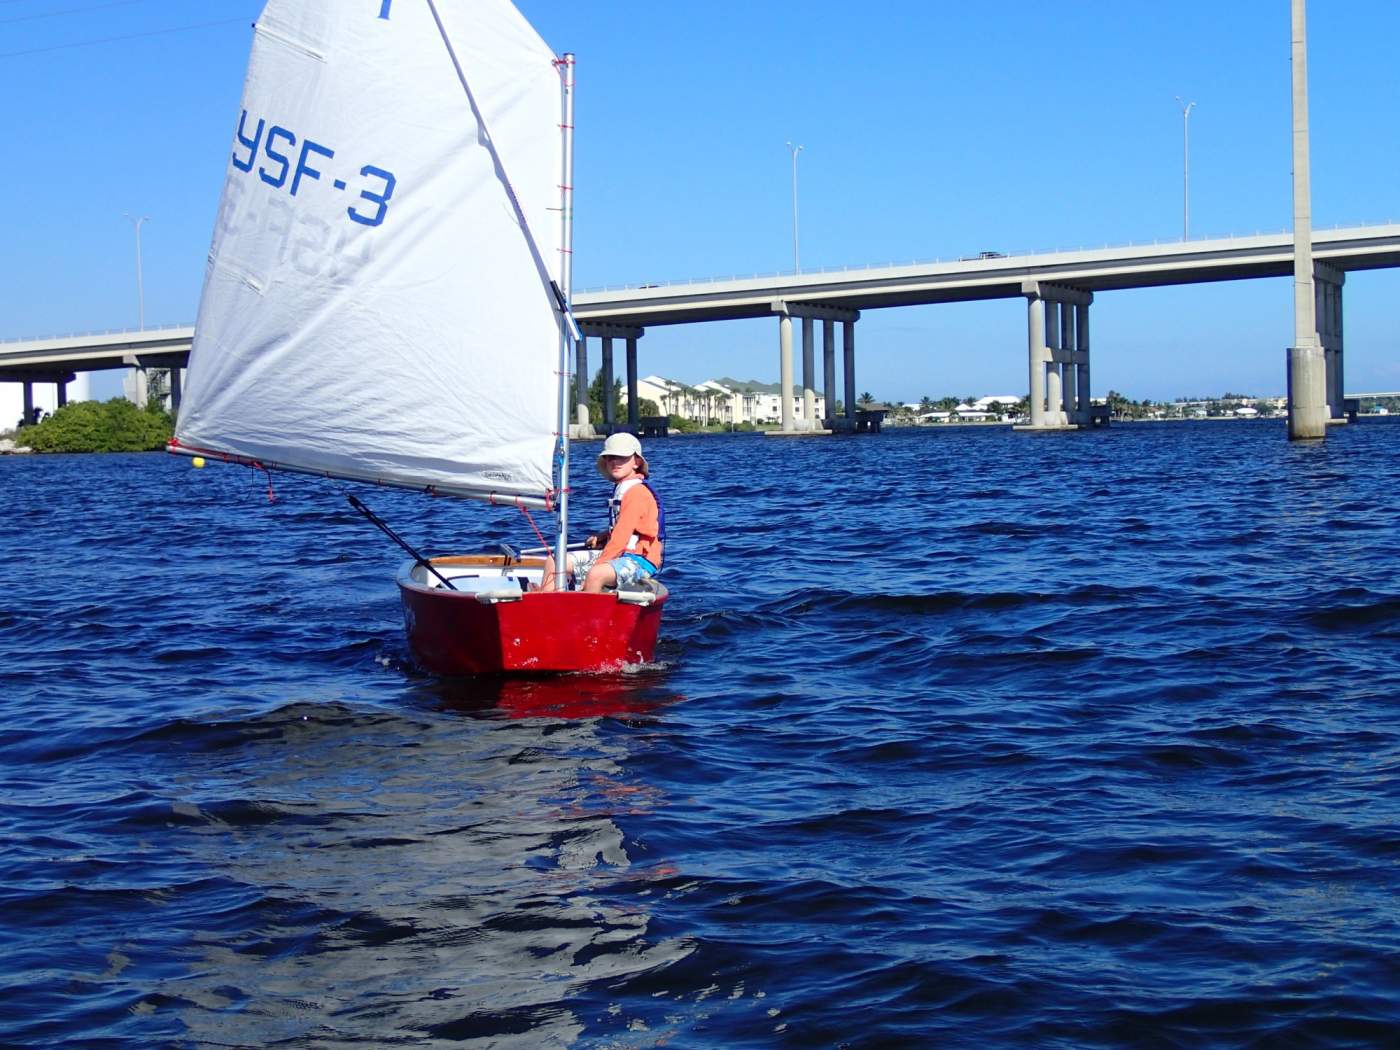 Youth Sailor with bridge in background